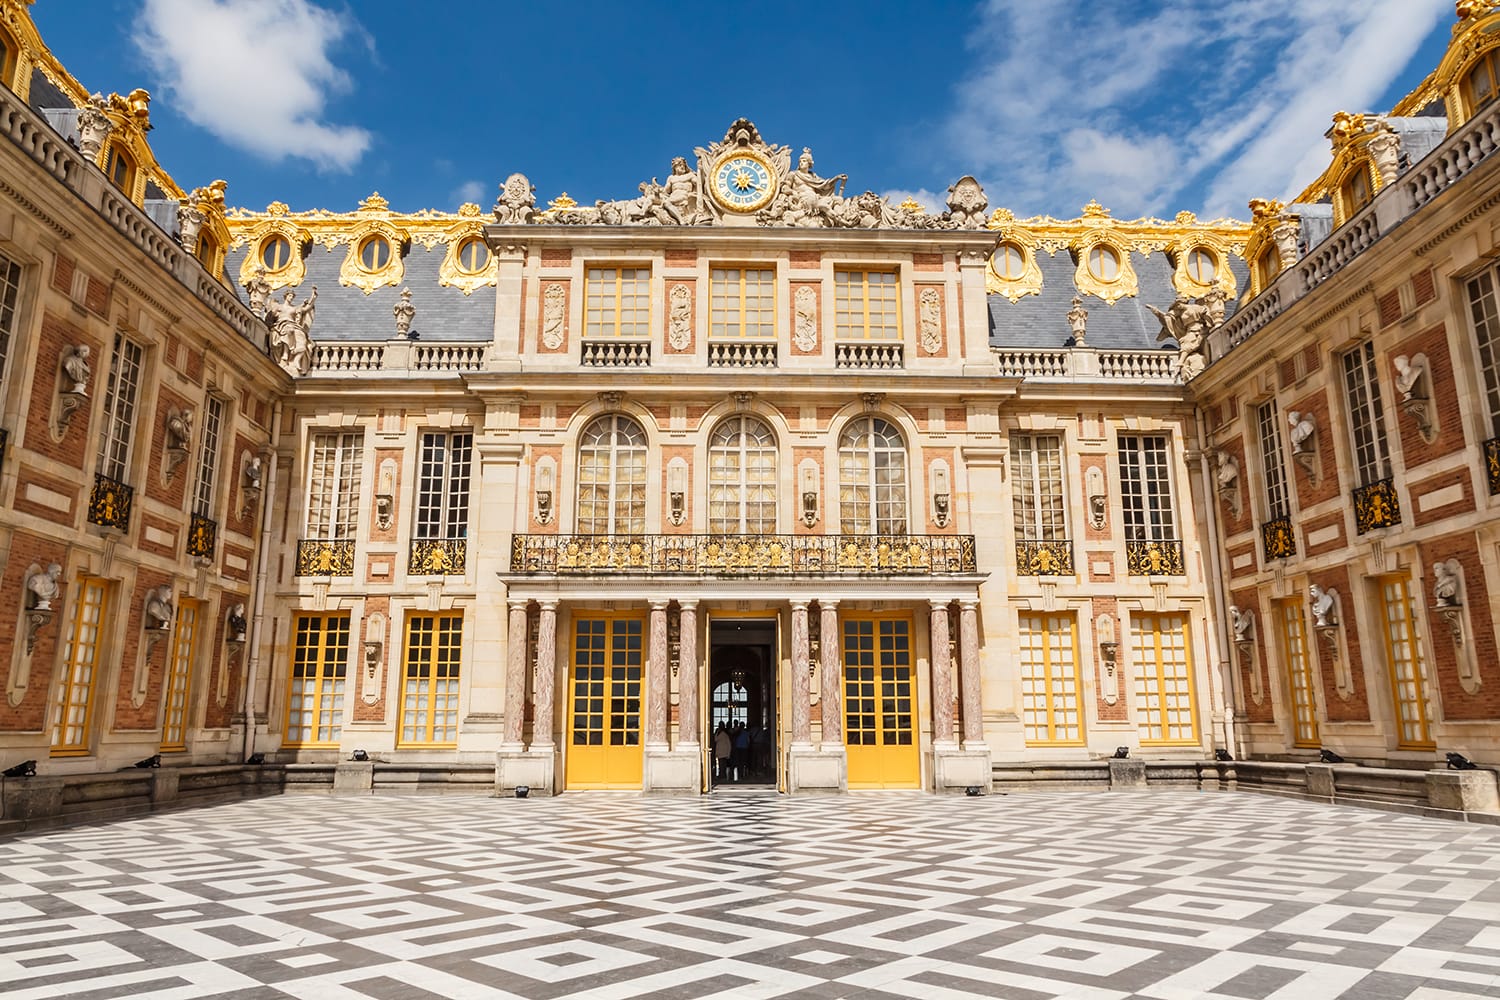 The Palace of Versailles is a royal chateau in Versailles, France